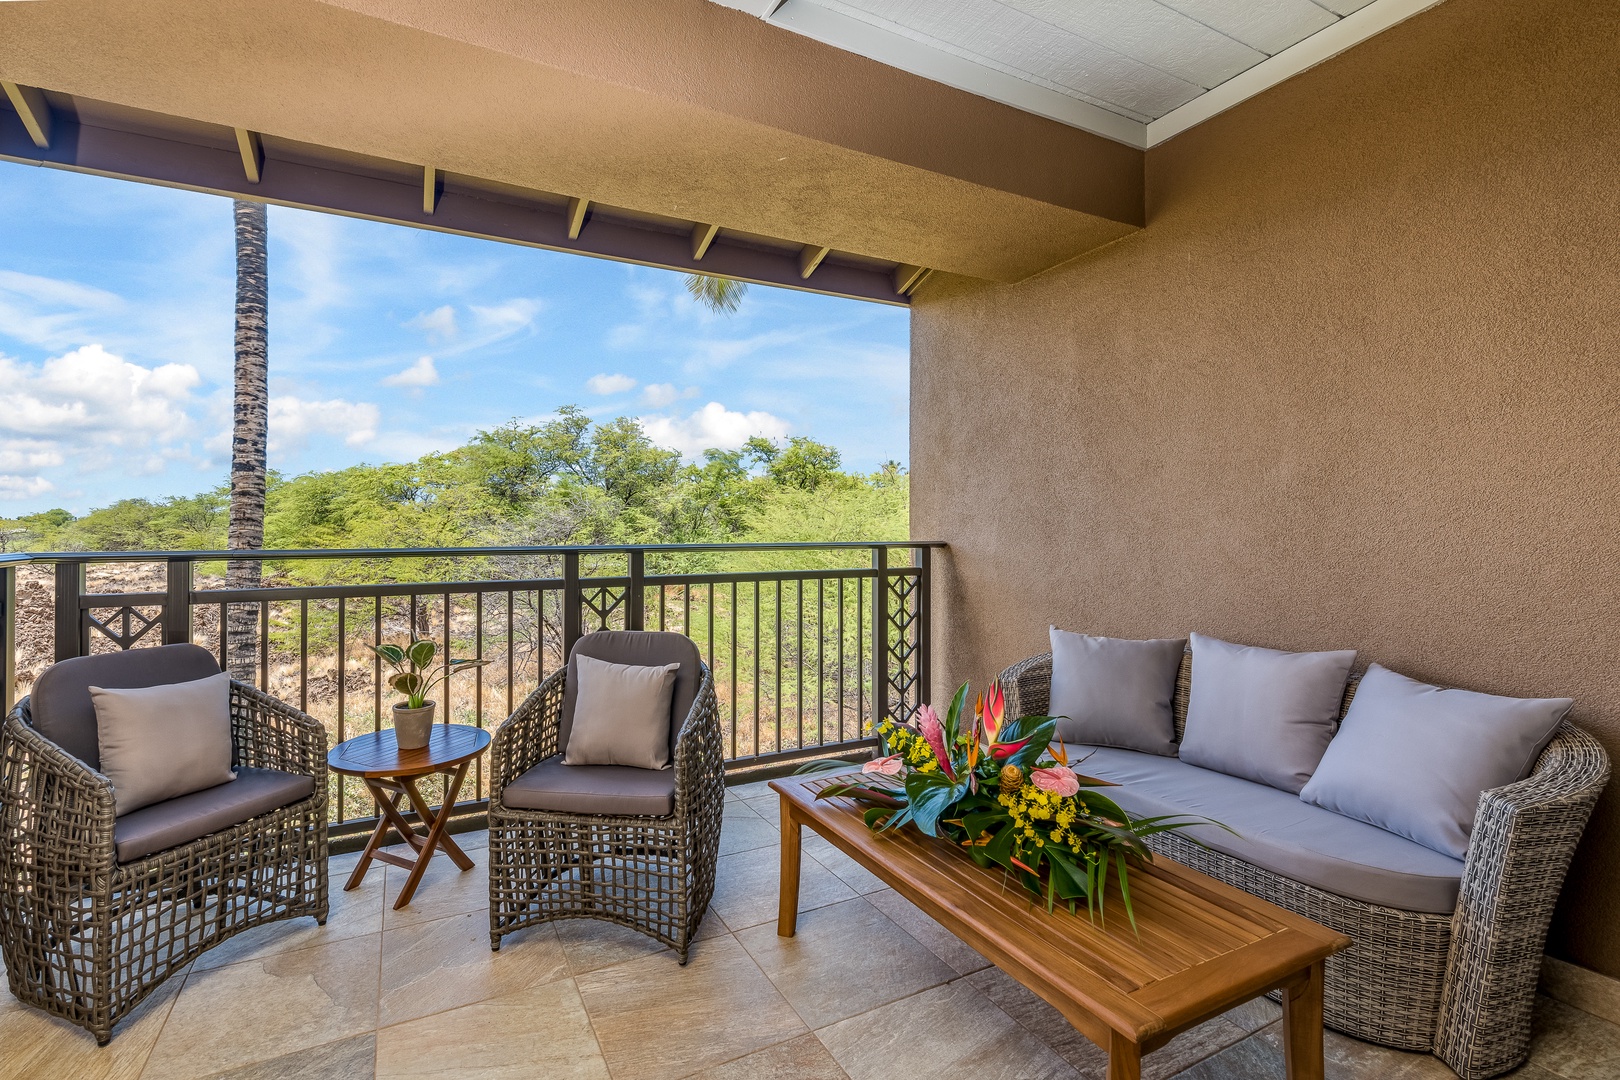 Kamuela Vacation Rentals, Mauna Lani Fairways #603 - Primary suite's secluded balcony oasis